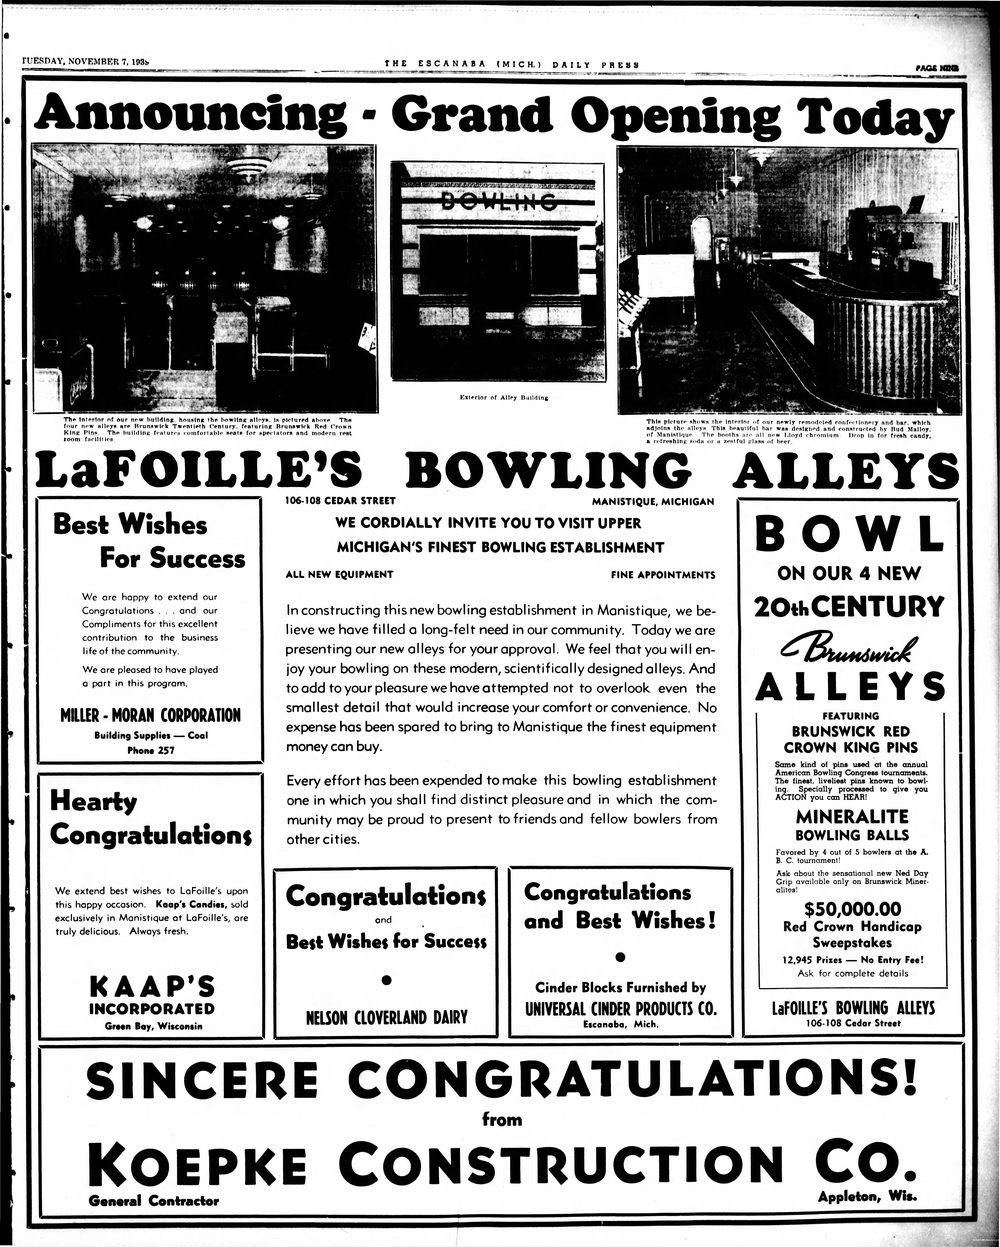 LaFoilles Bowling Alleys - Grand Opening Nov 7 1939